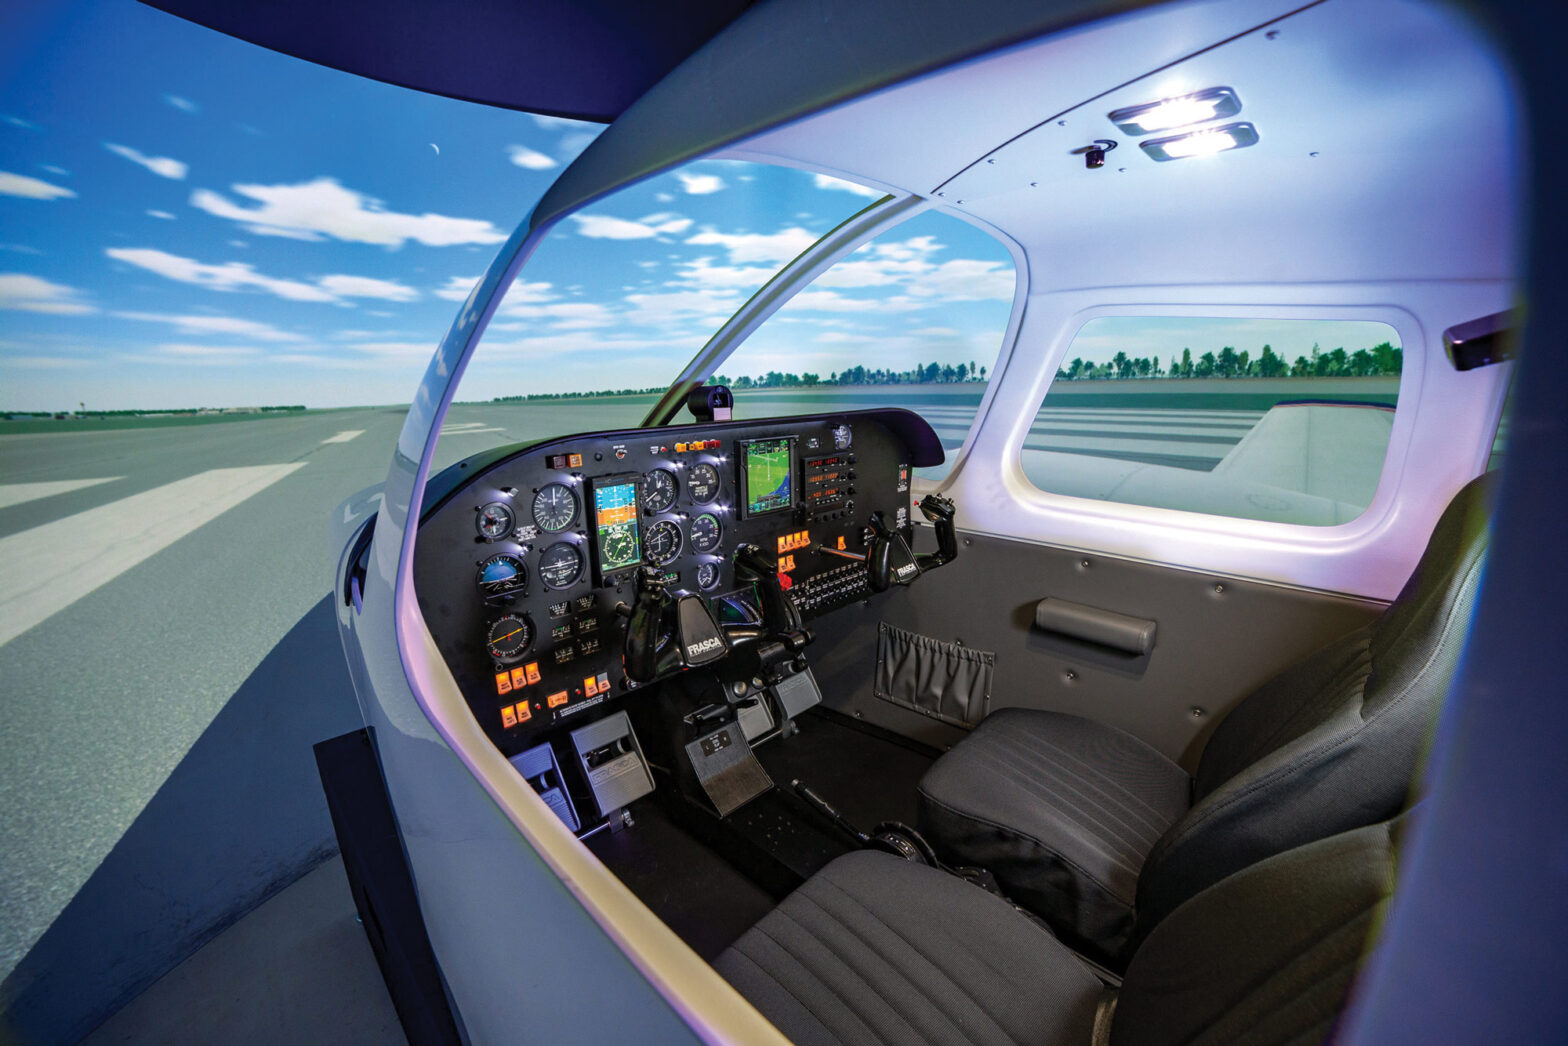 Its Fascinating what AIRCRAFT are Available in FLIGHT Simulators?